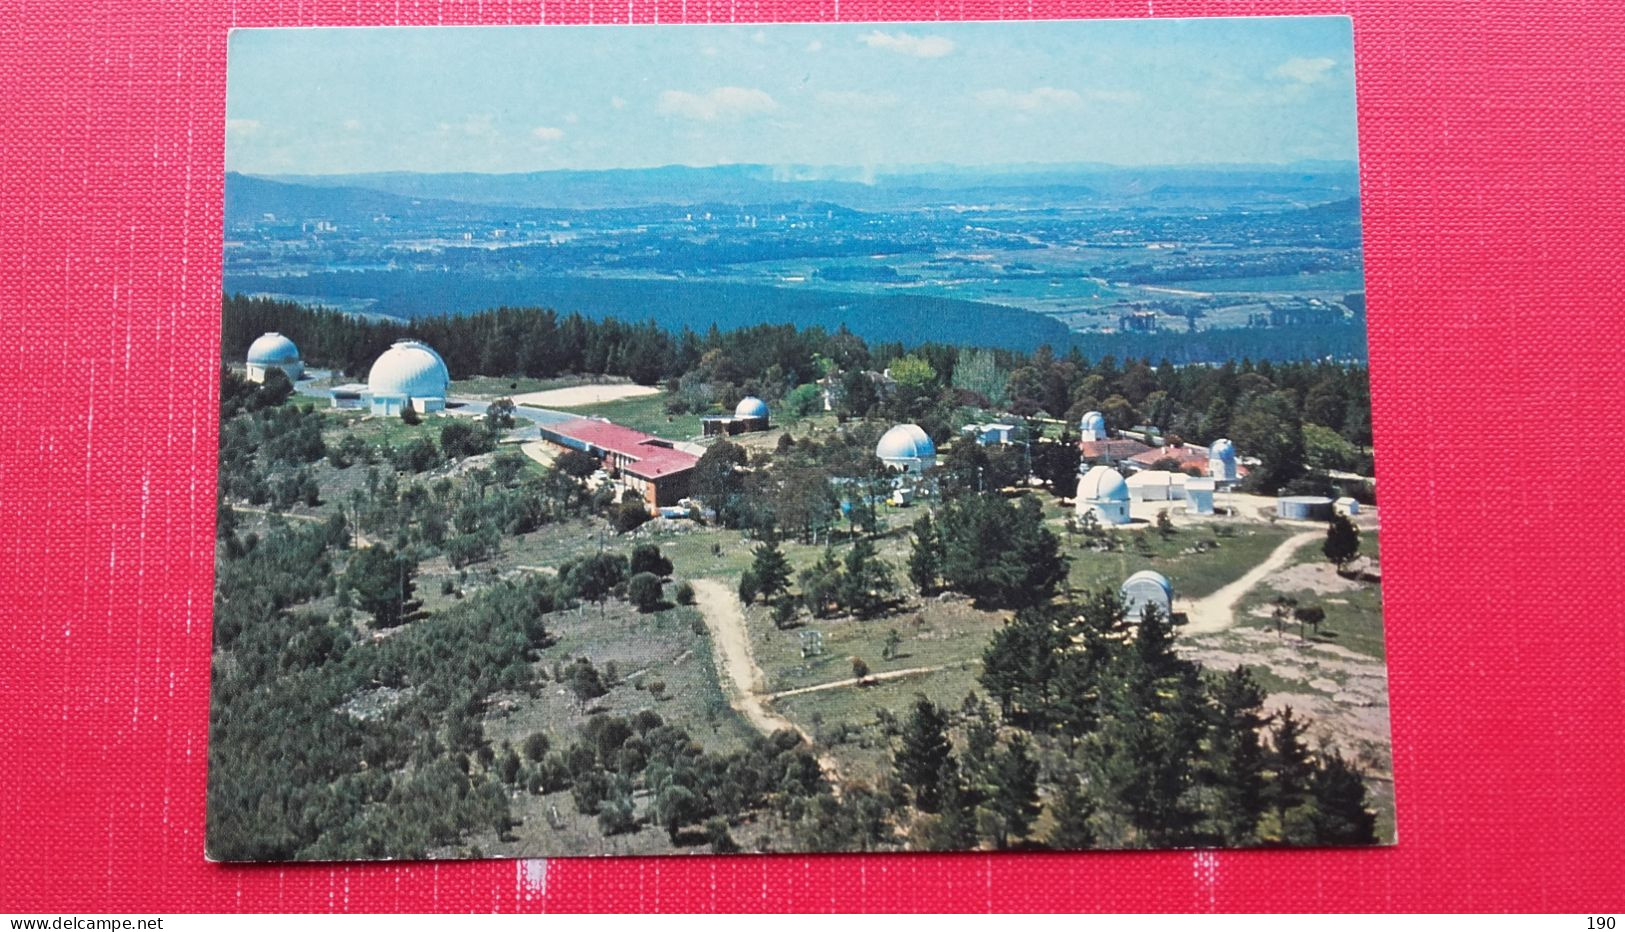 Mount Stromlo Observatory - Canberra (ACT)